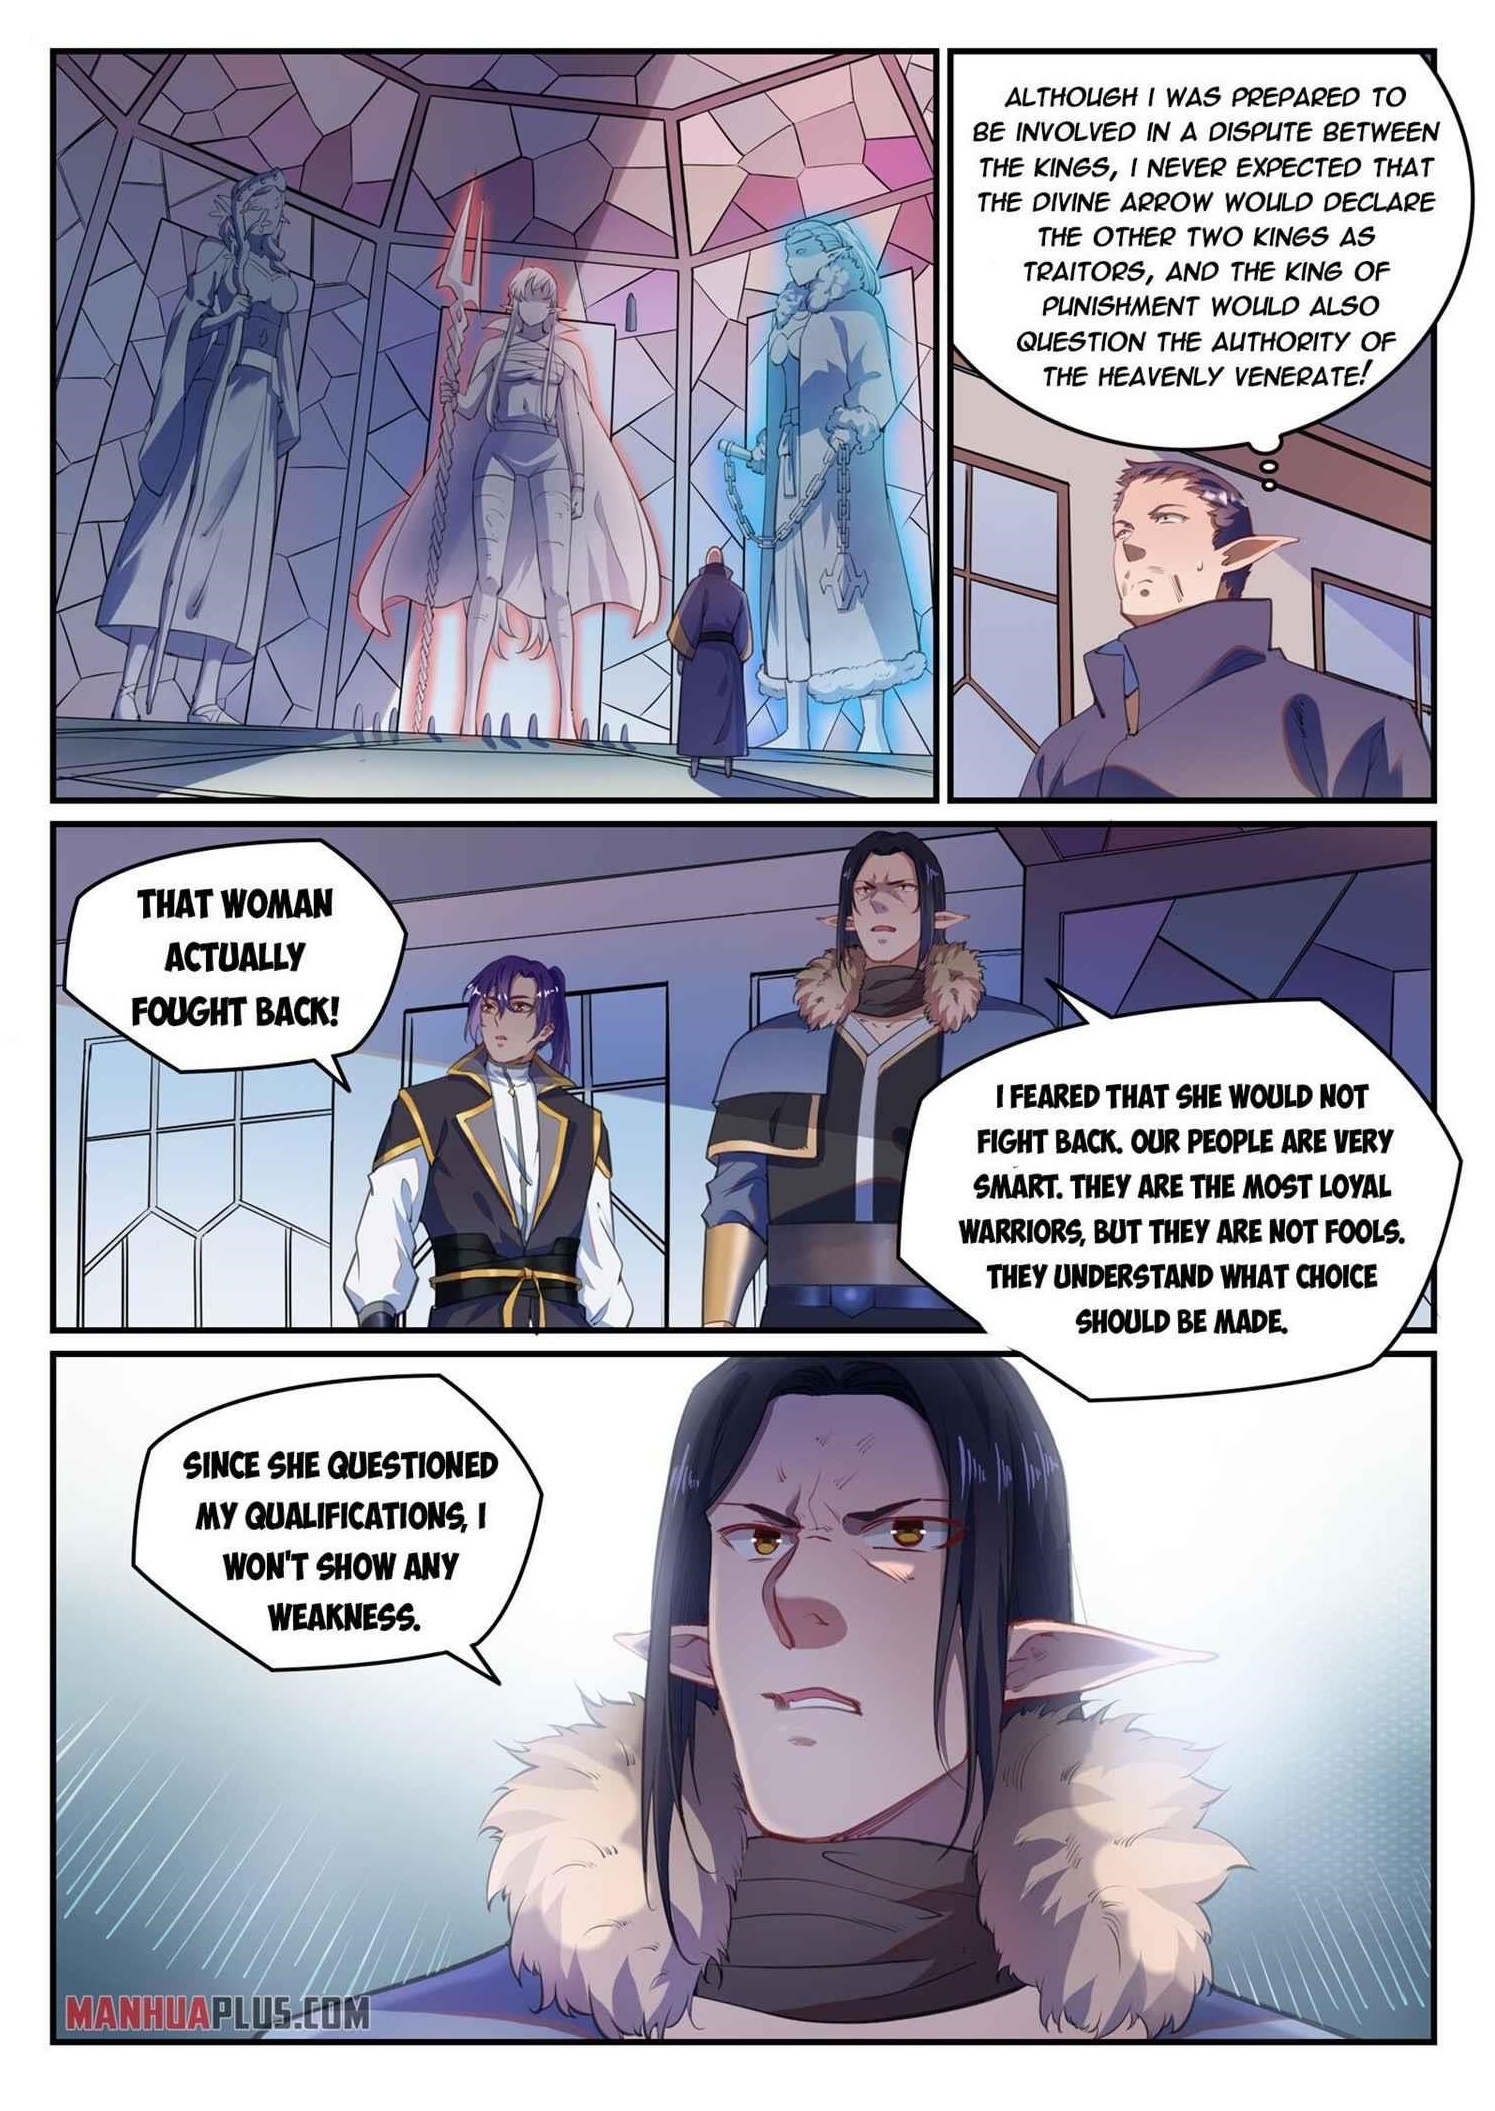 APOTHEOSIS Chapter 790 - Page 1